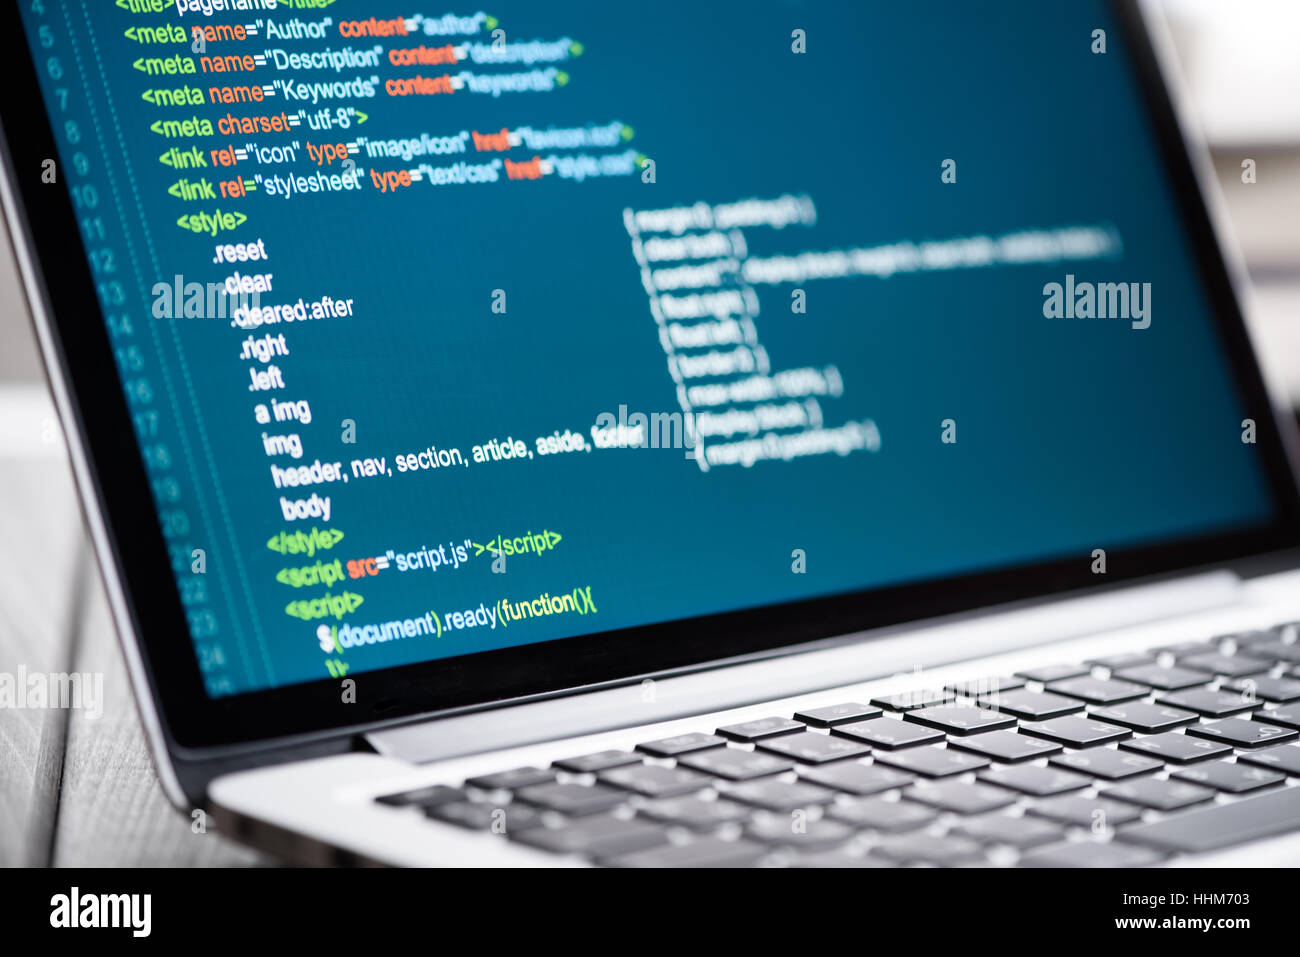 Html Code on Dark Background Stock Image - Image of software, screen:  155503891